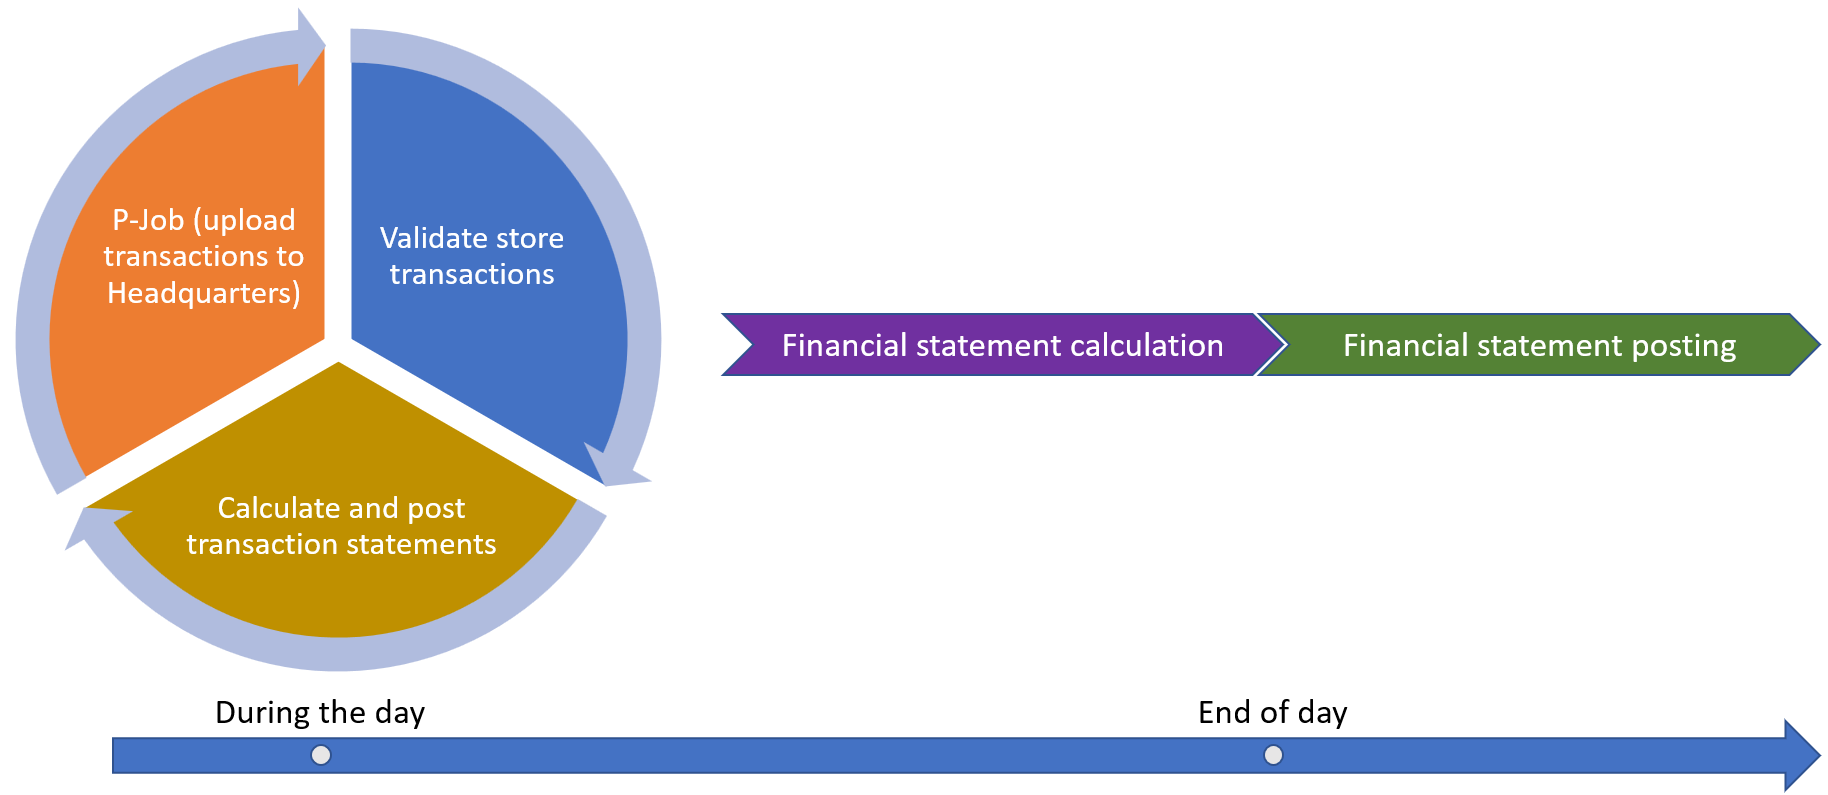 Illustration showing the recurring daytime processes for uploading transactions, validating transactions, and calculating and posting transaction statements and the end of day processes for financial statement calculation and posting